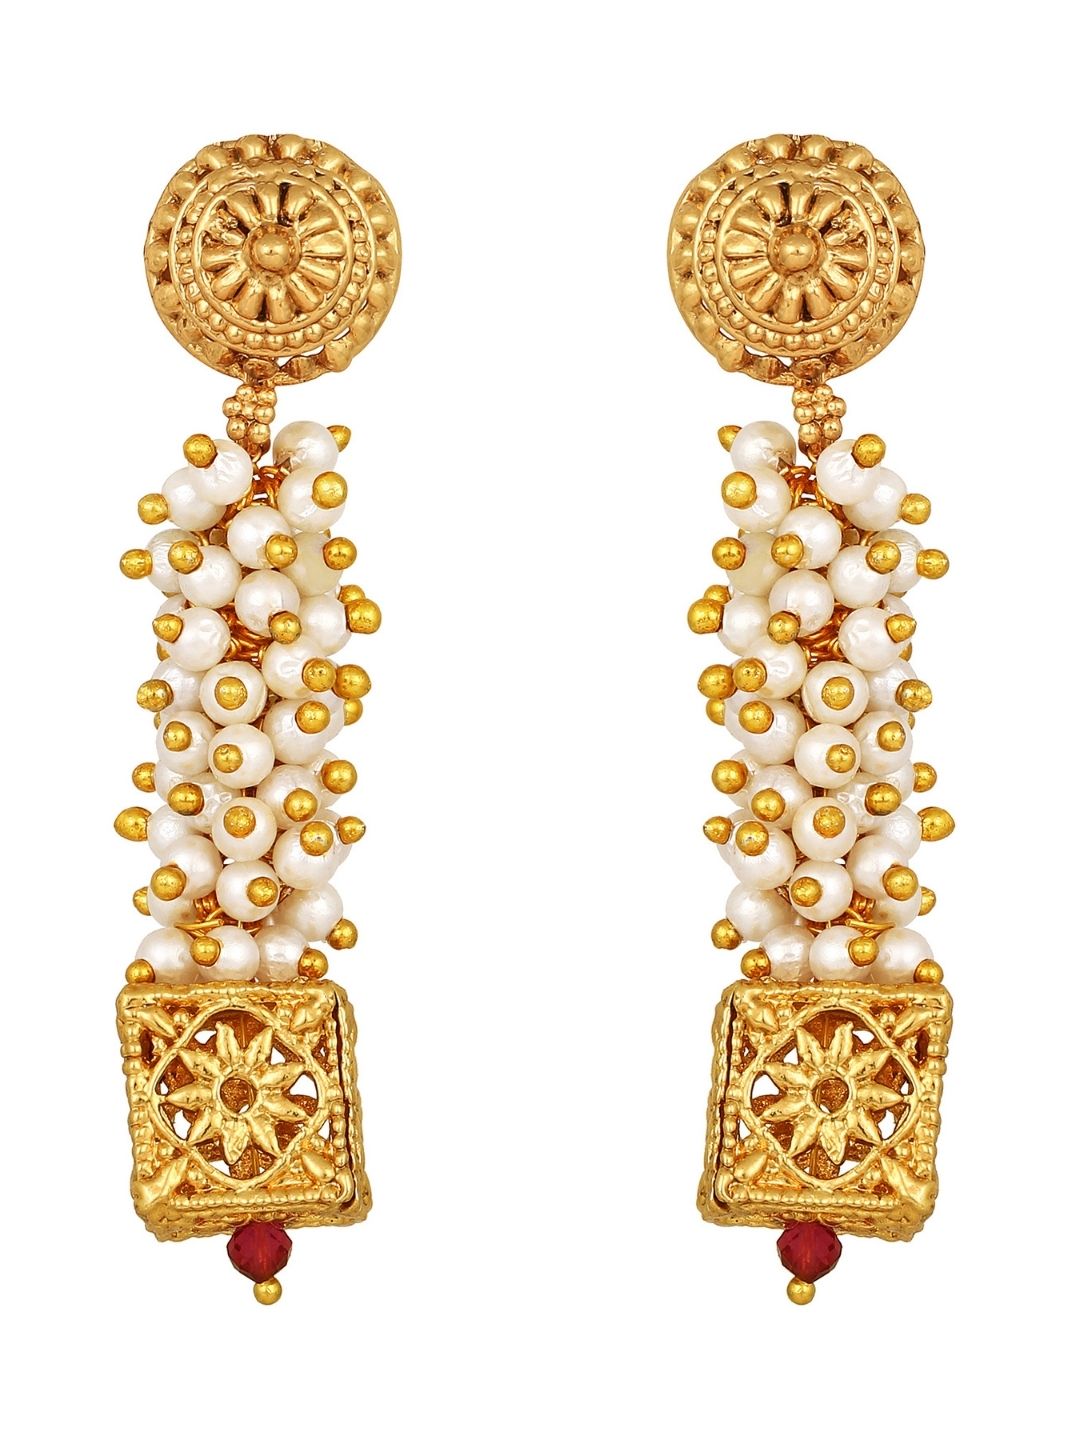 INDIAN ETHNIC ANTIQUE Look Traditional South Indian Style Jhumka jhumki  Earrings $9.99 - PicClick